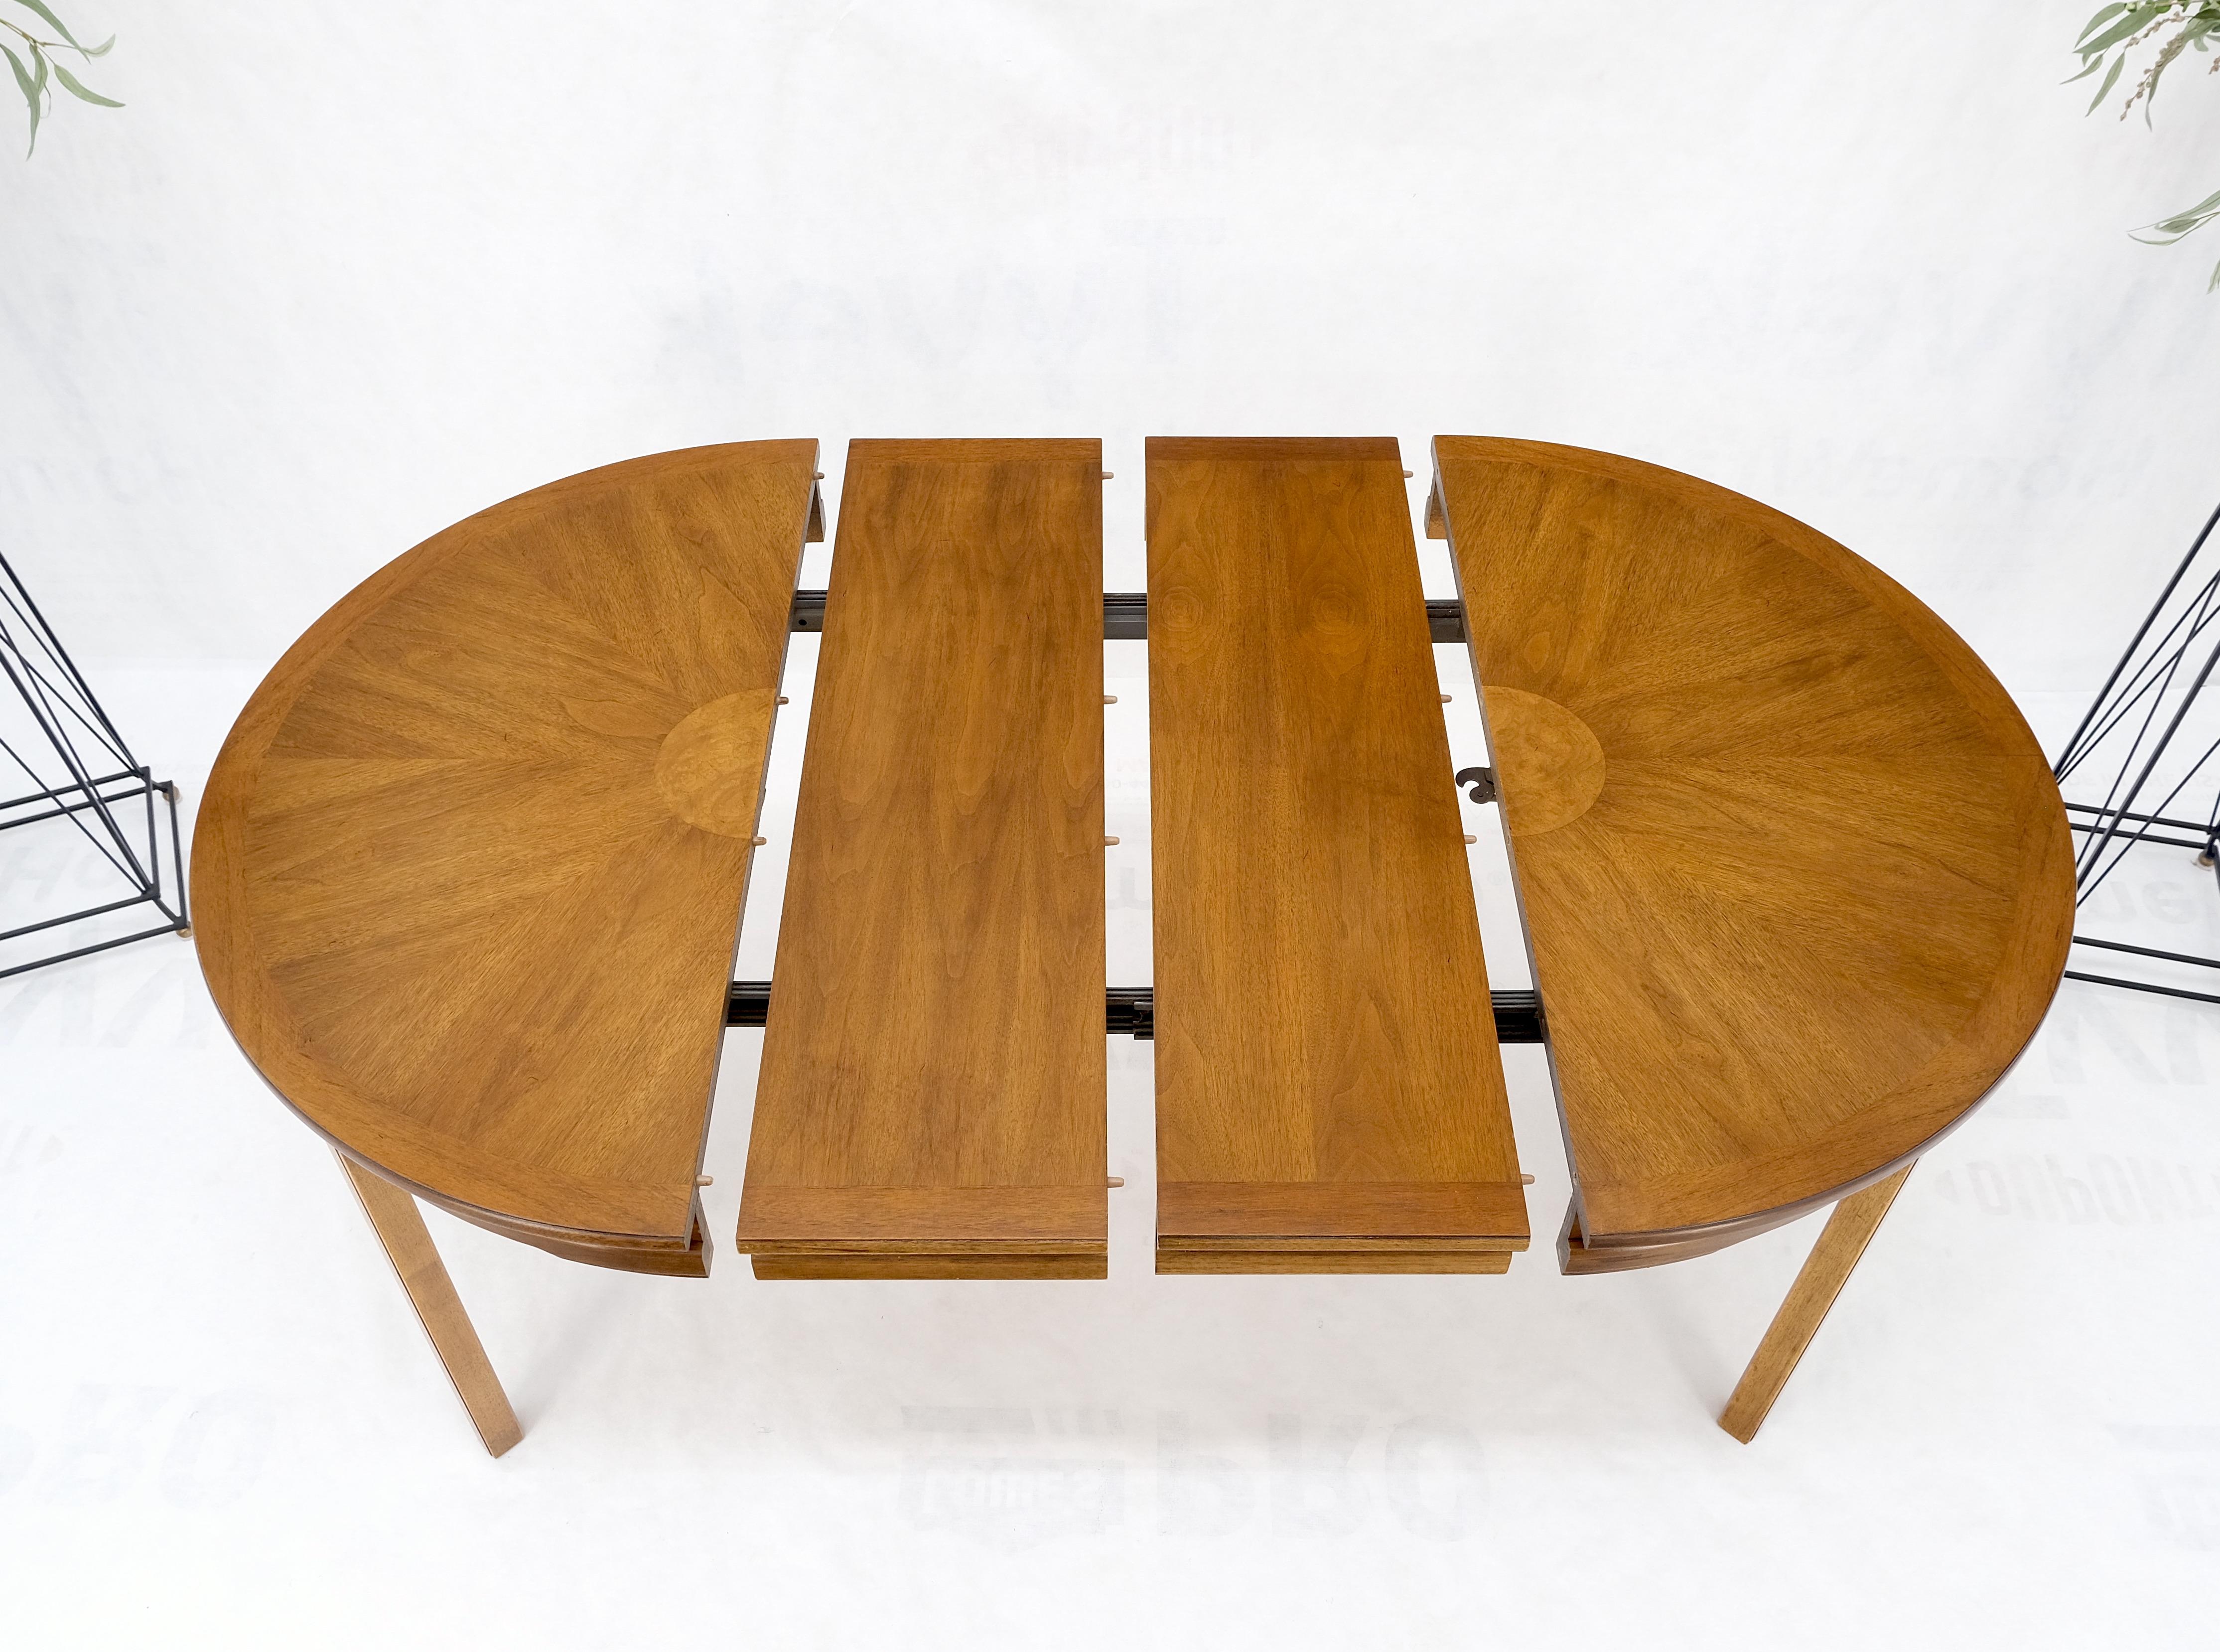 20th Century Round Sunburst Pattern Mid-Century Modern Dining Table with Two Leaves Mint For Sale